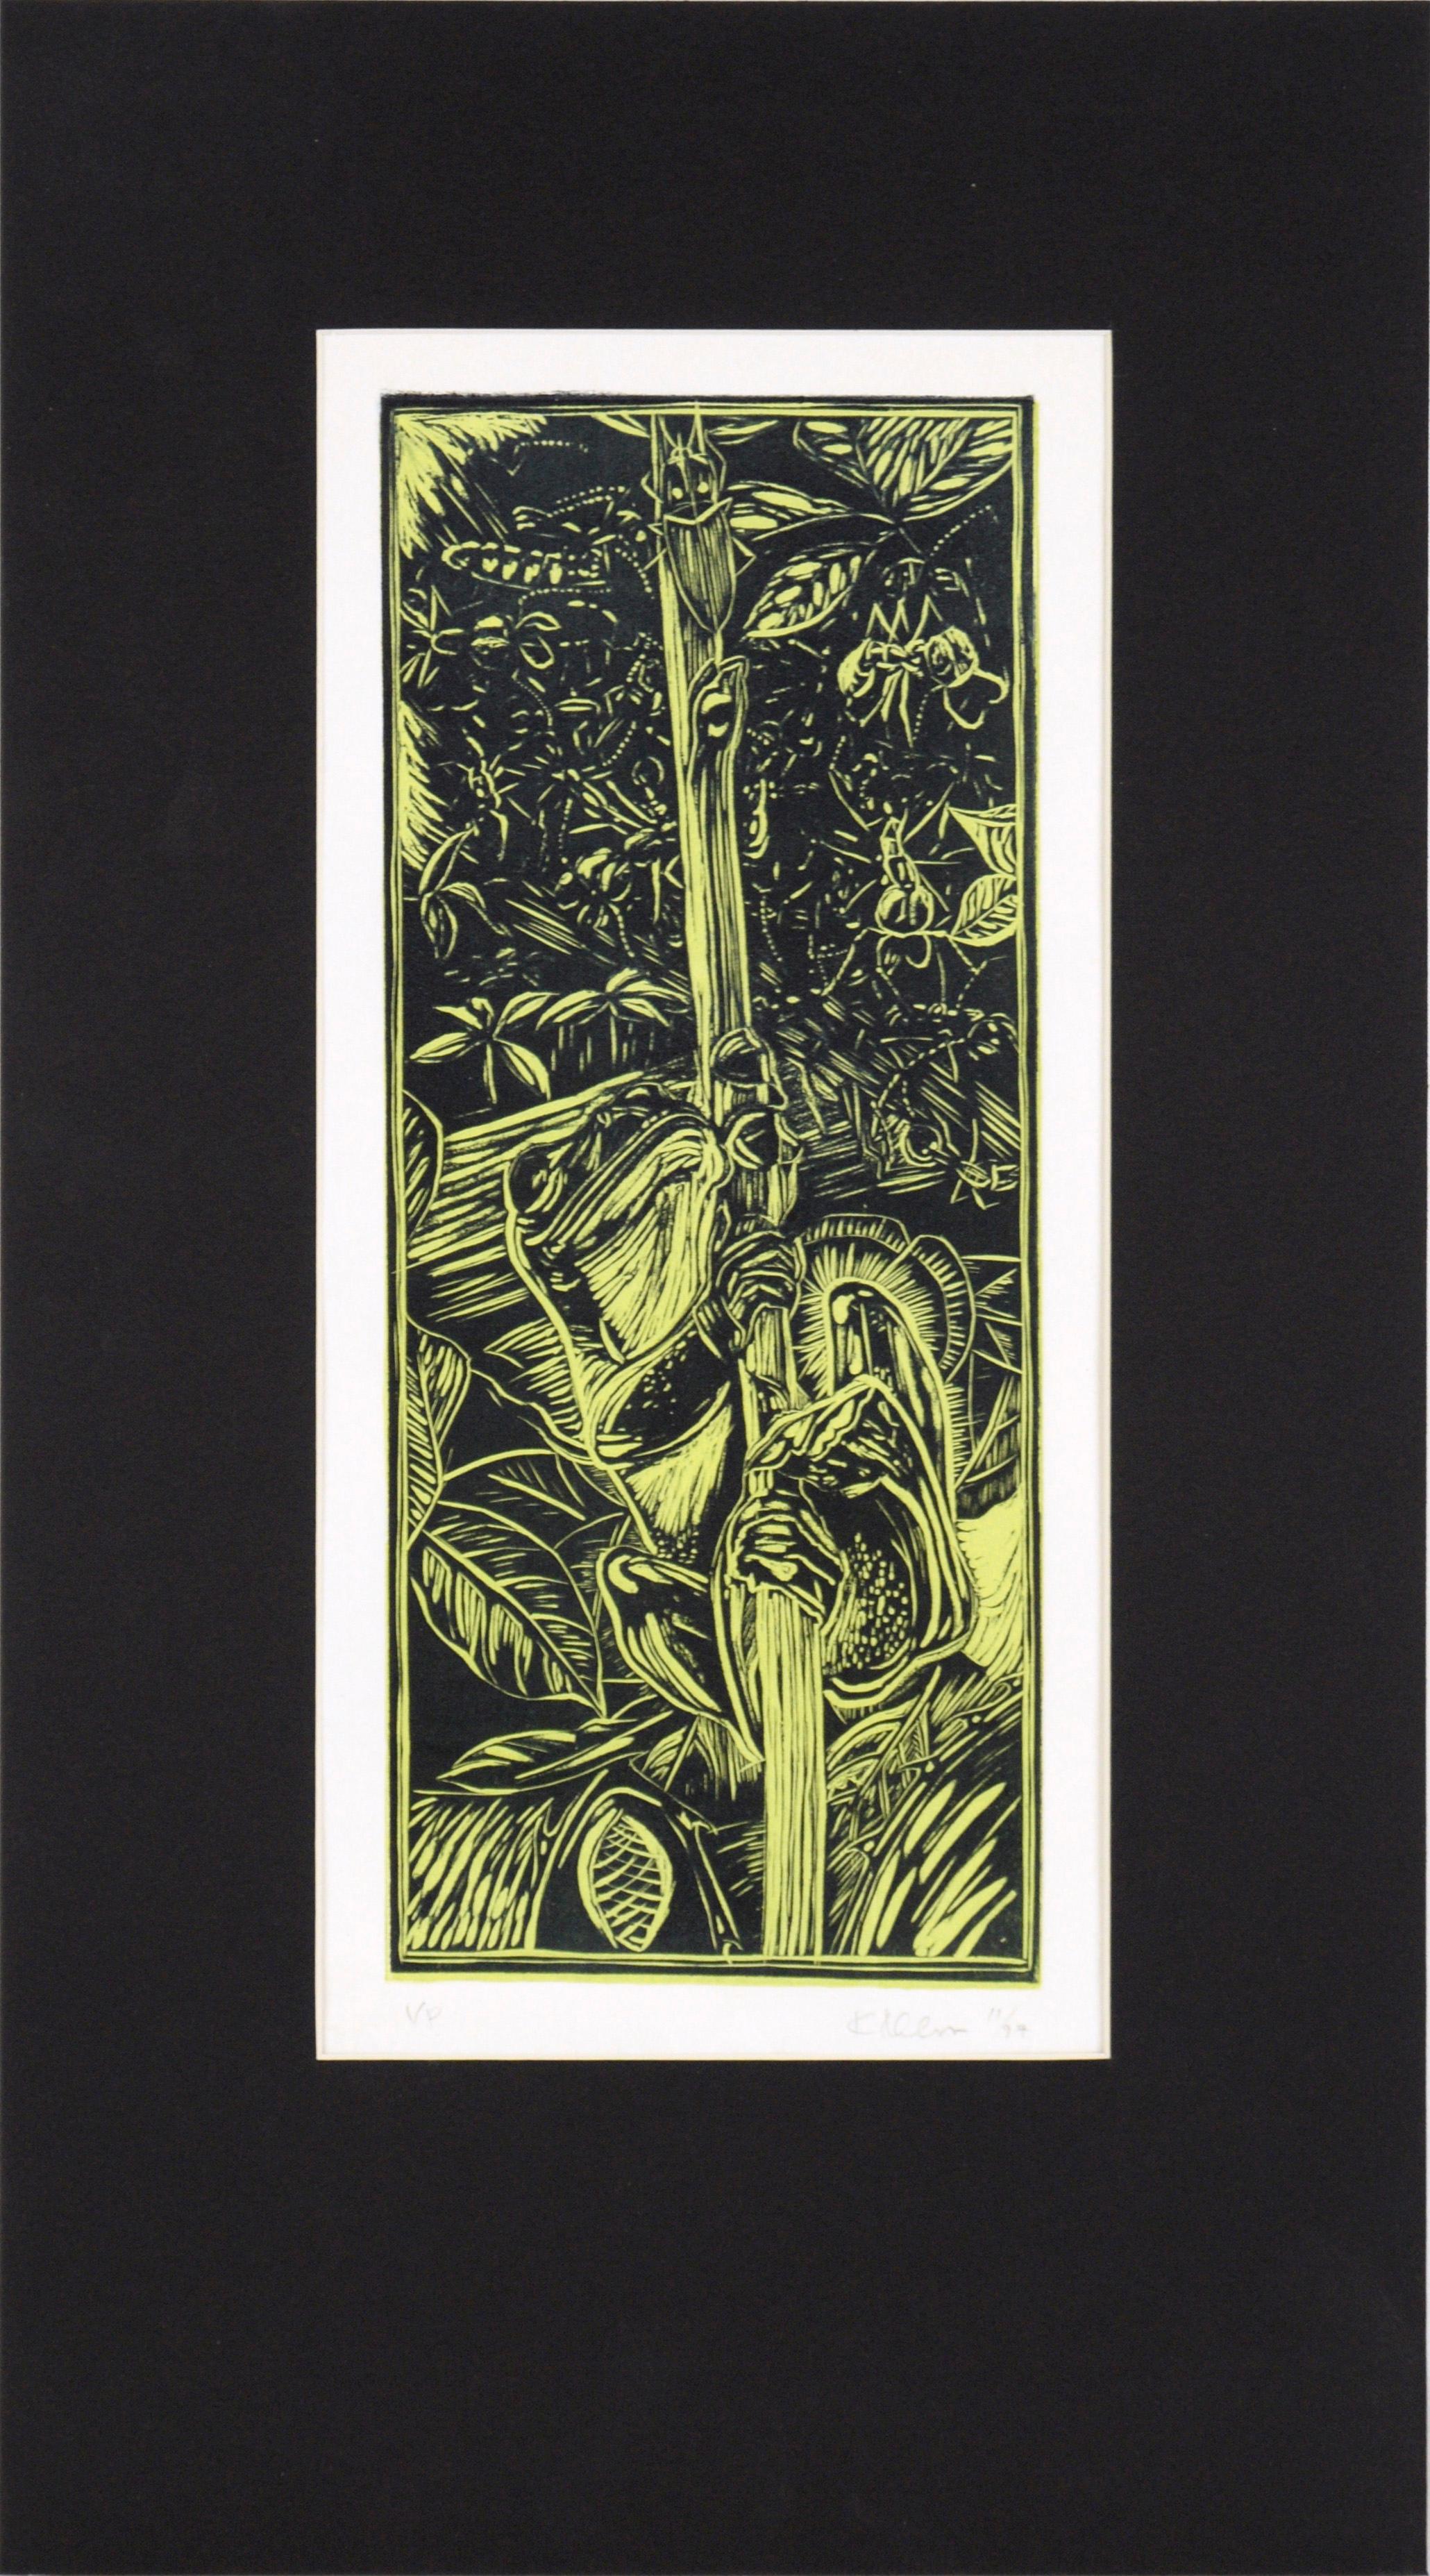 Unknown Landscape Print - Frog on a Stalk in the Jungle - Linocut Print on Tissue Paper (proof)